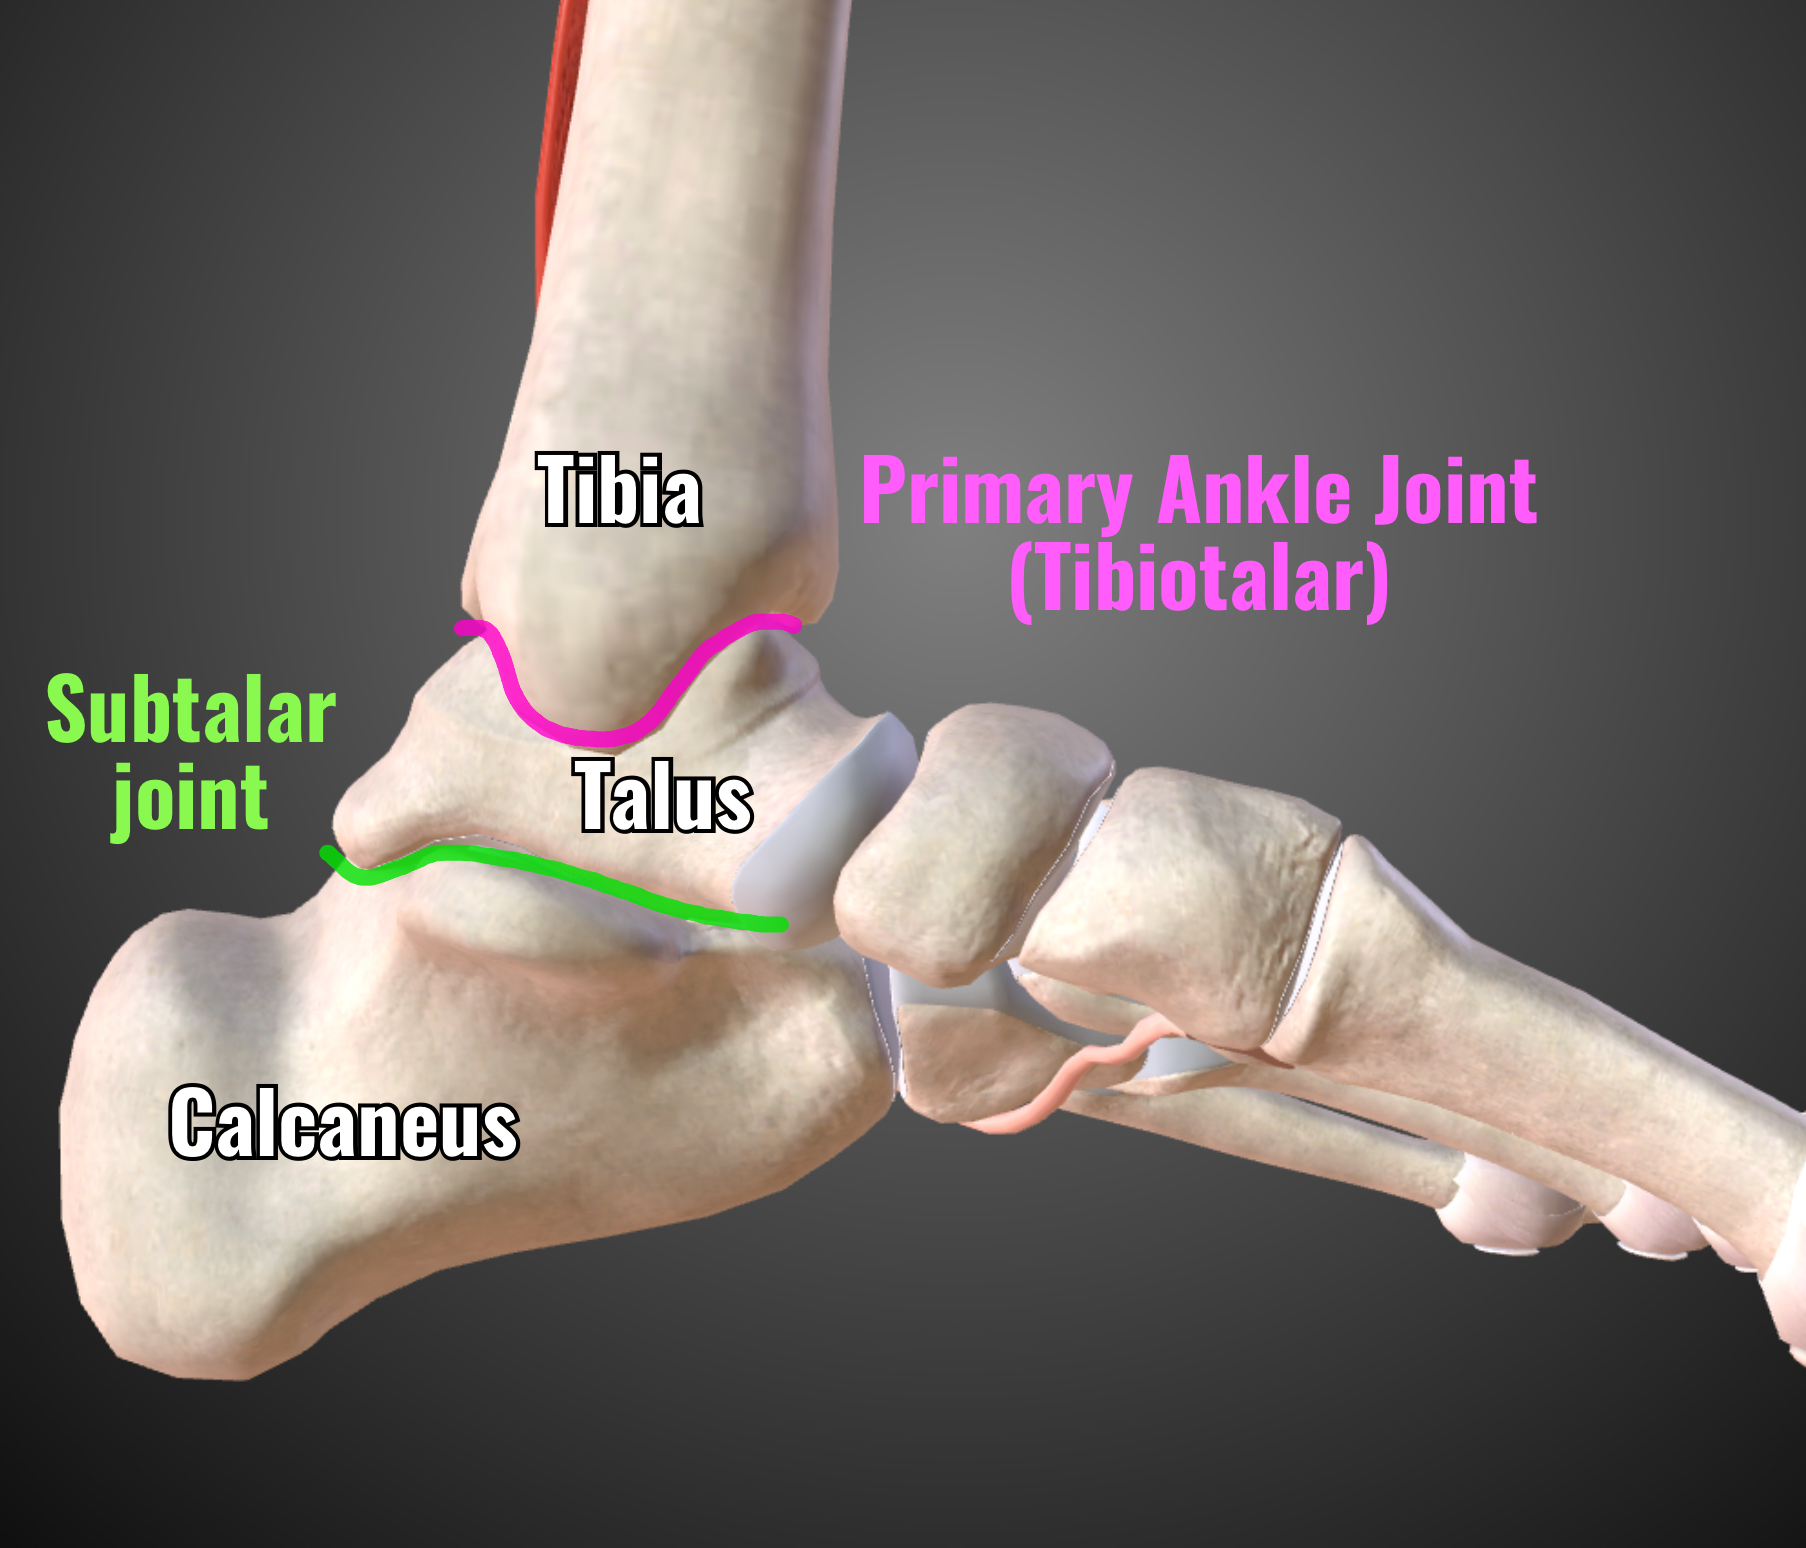 Brian Sutterer MD on X: The subtalar joint is not the primary